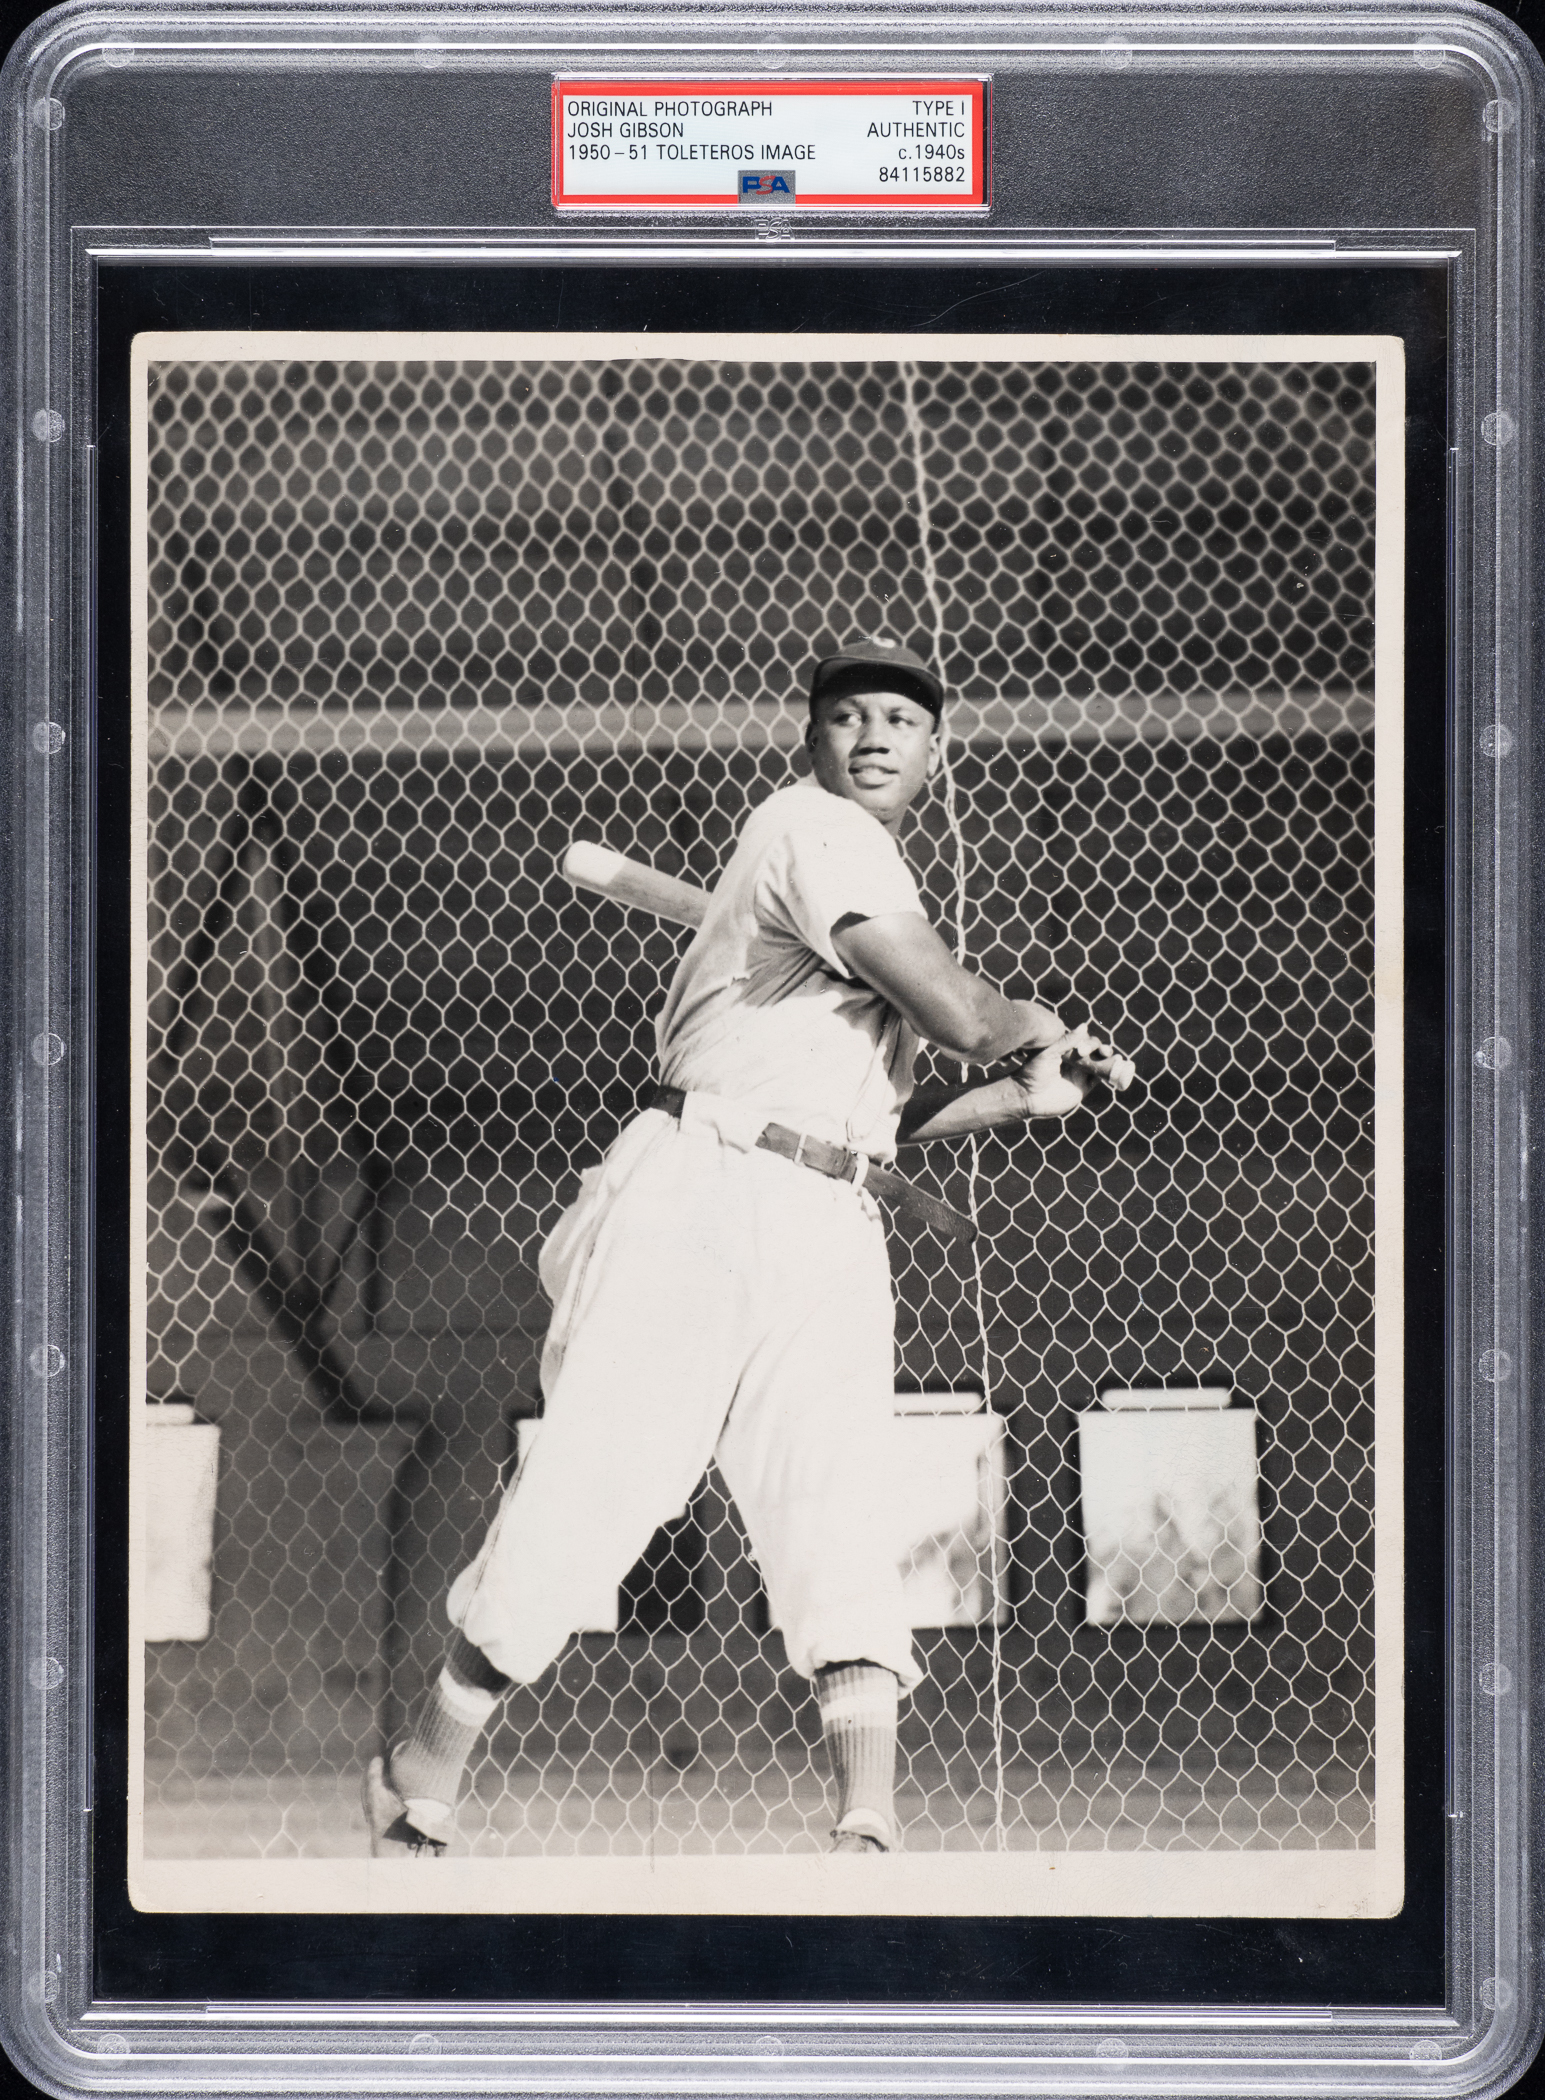 This Josh Gibson original Type 1 photo from the 1940s sold for $150,000 and was the top-selling photograph in REA's Spring Auction